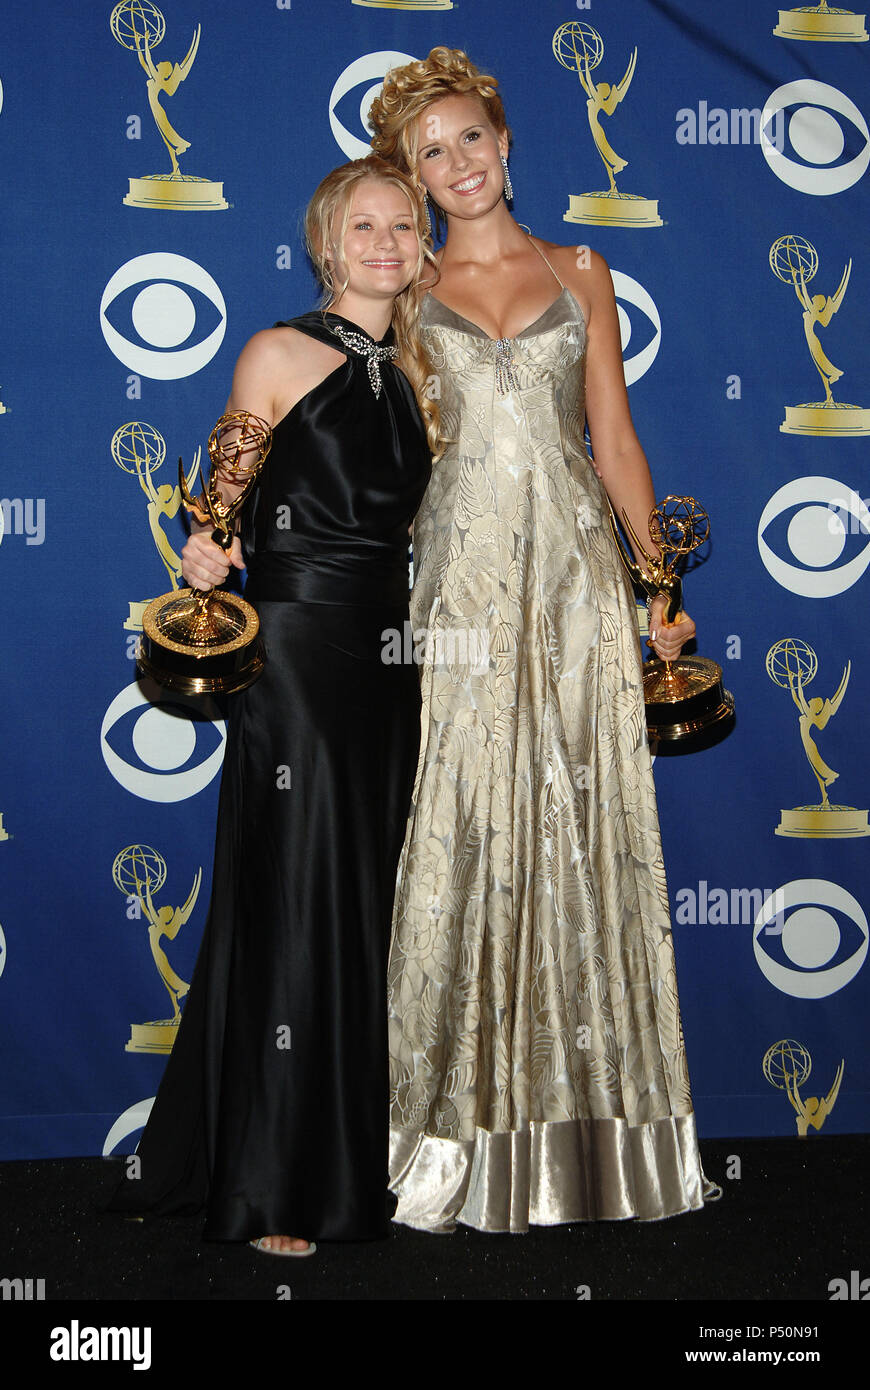 From Los, Emily DeRaven and Maggie Grace backstage at the 57th Emmy's Awards at the Shrine Auditorium in Los Angeles. September 18, 2005.          -            DeRavenEmily GraceMaggie229.jpgDeRavenEmily GraceMaggie229  Event in Hollywood Life - California, Red Carpet Event, USA, Film Industry, Celebrities, Photography, Bestof, Arts Culture and Entertainment, Topix Celebrities fashion, Best of, Hollywood Life, Event in Hollywood Life - California,  backstage trophy, Awards show, movie celebrities, TV celebrities, Music celebrities, Topix, Bestof, Arts Culture and Entertainment, Photography,    Stock Photo